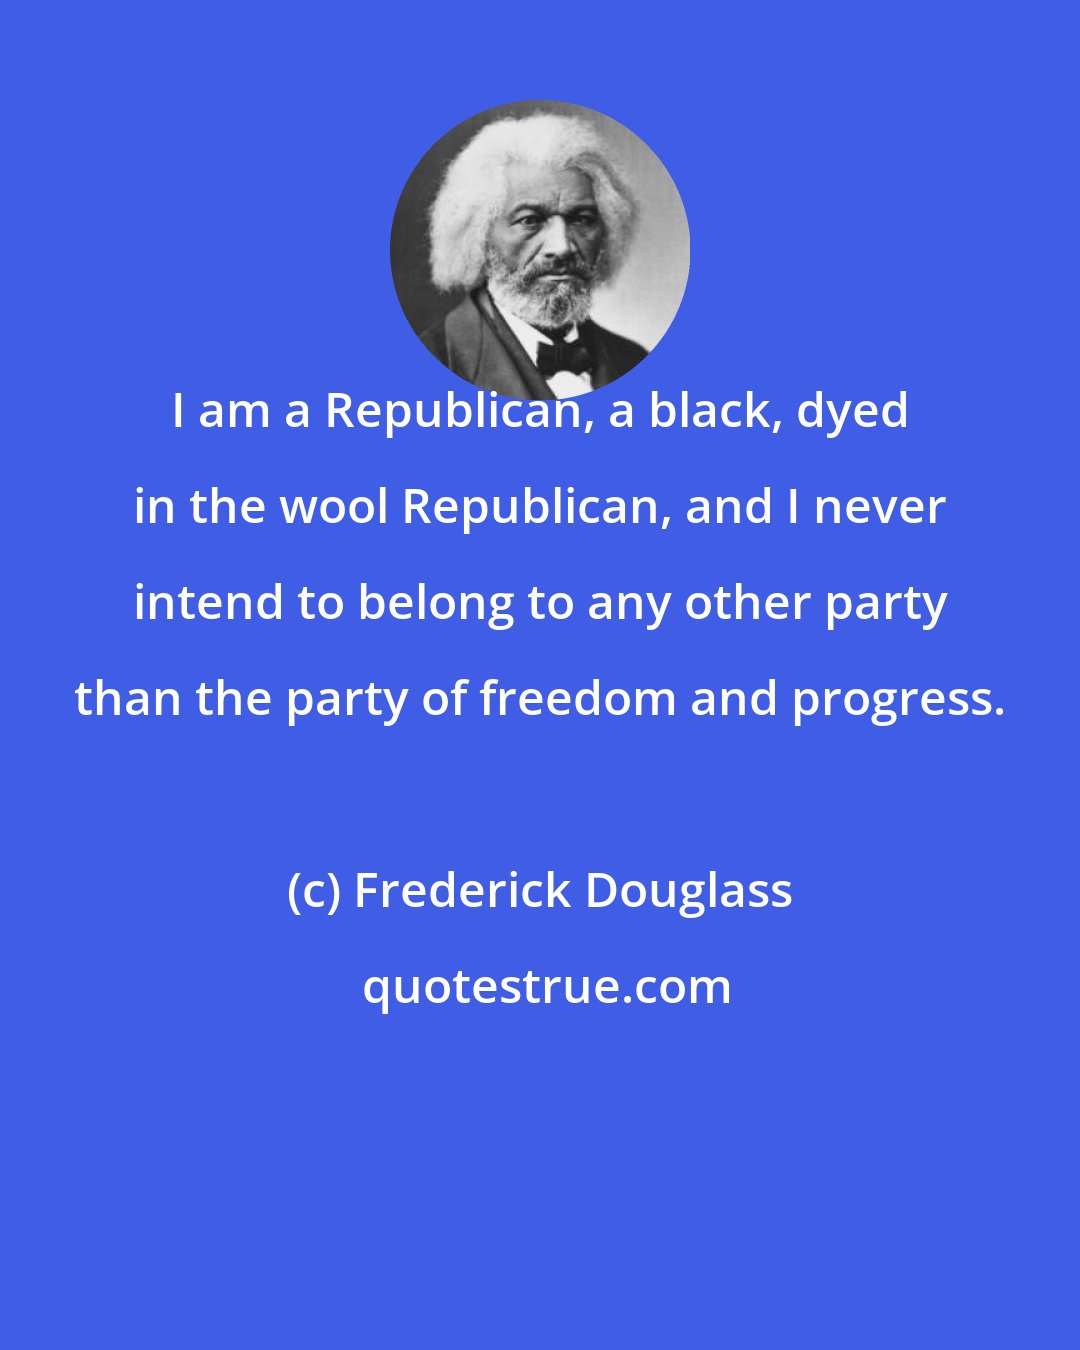 Frederick Douglass: I am a Republican, a black, dyed in the wool Republican, and I never intend to belong to any other party than the party of freedom and progress.